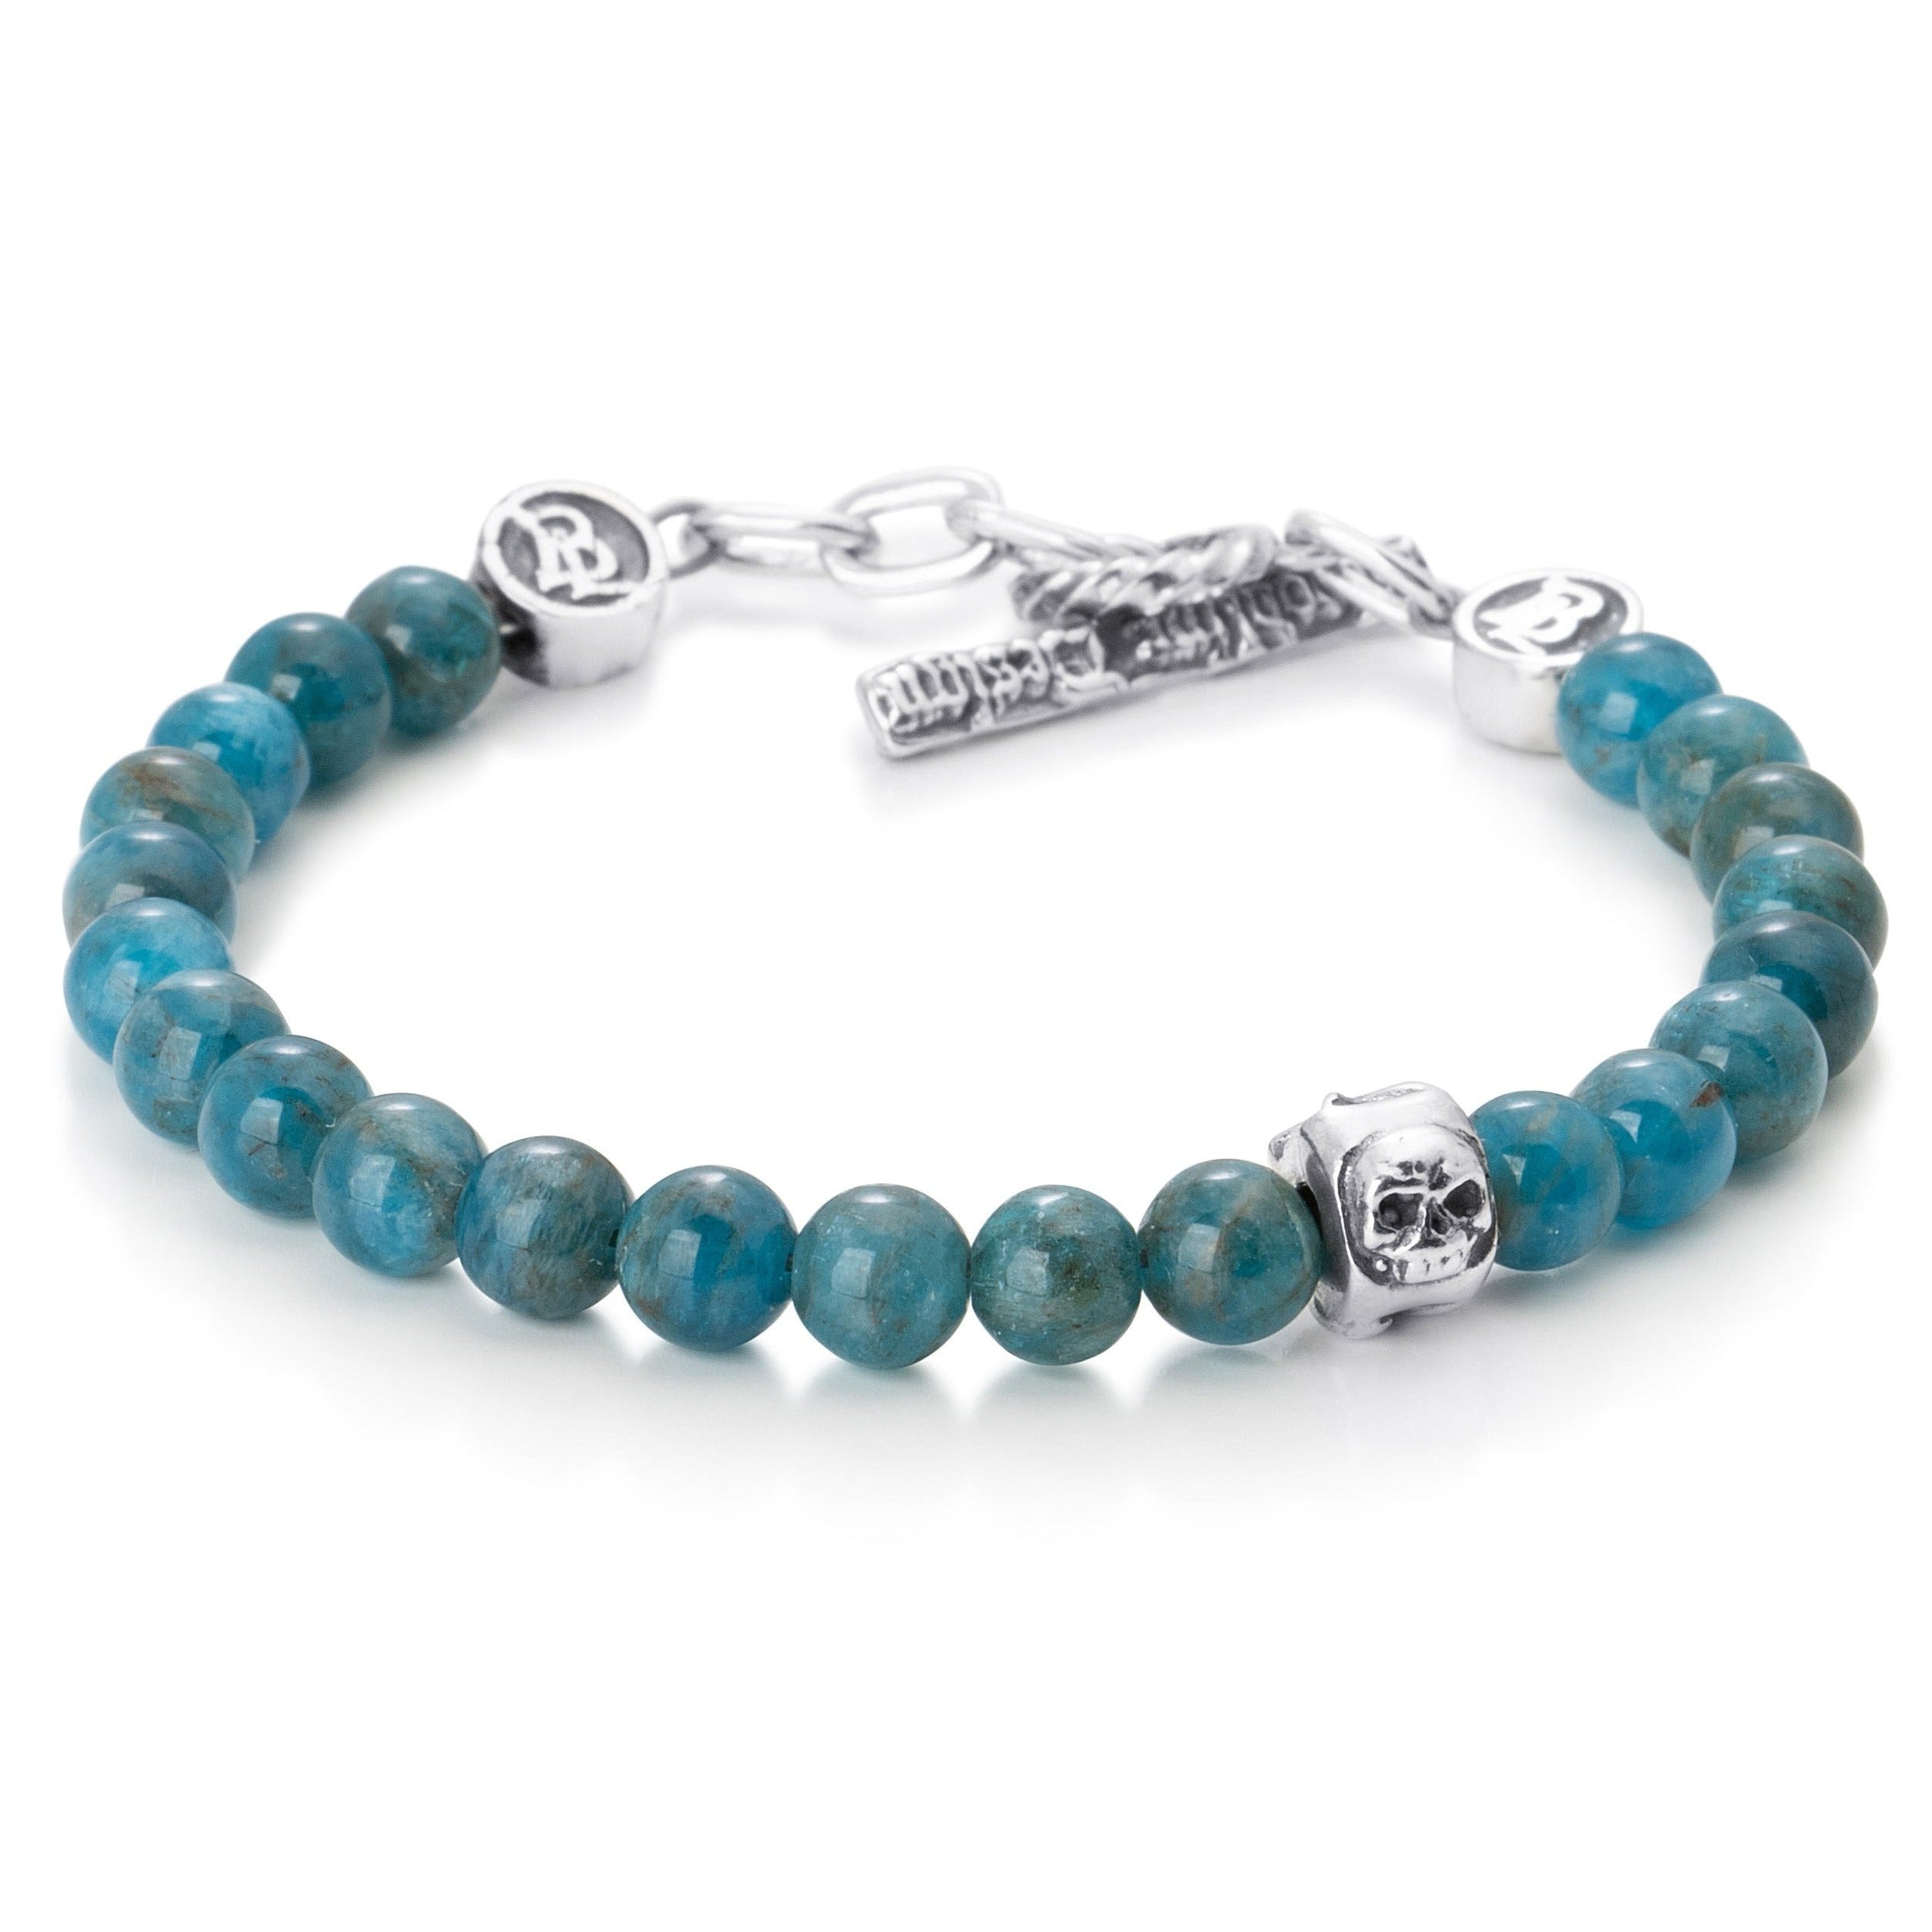  Apatite Beads paired with a single sterling silver bead engraved with a heart star and skull on a stainless steel cable with Sterling silver T clasp.